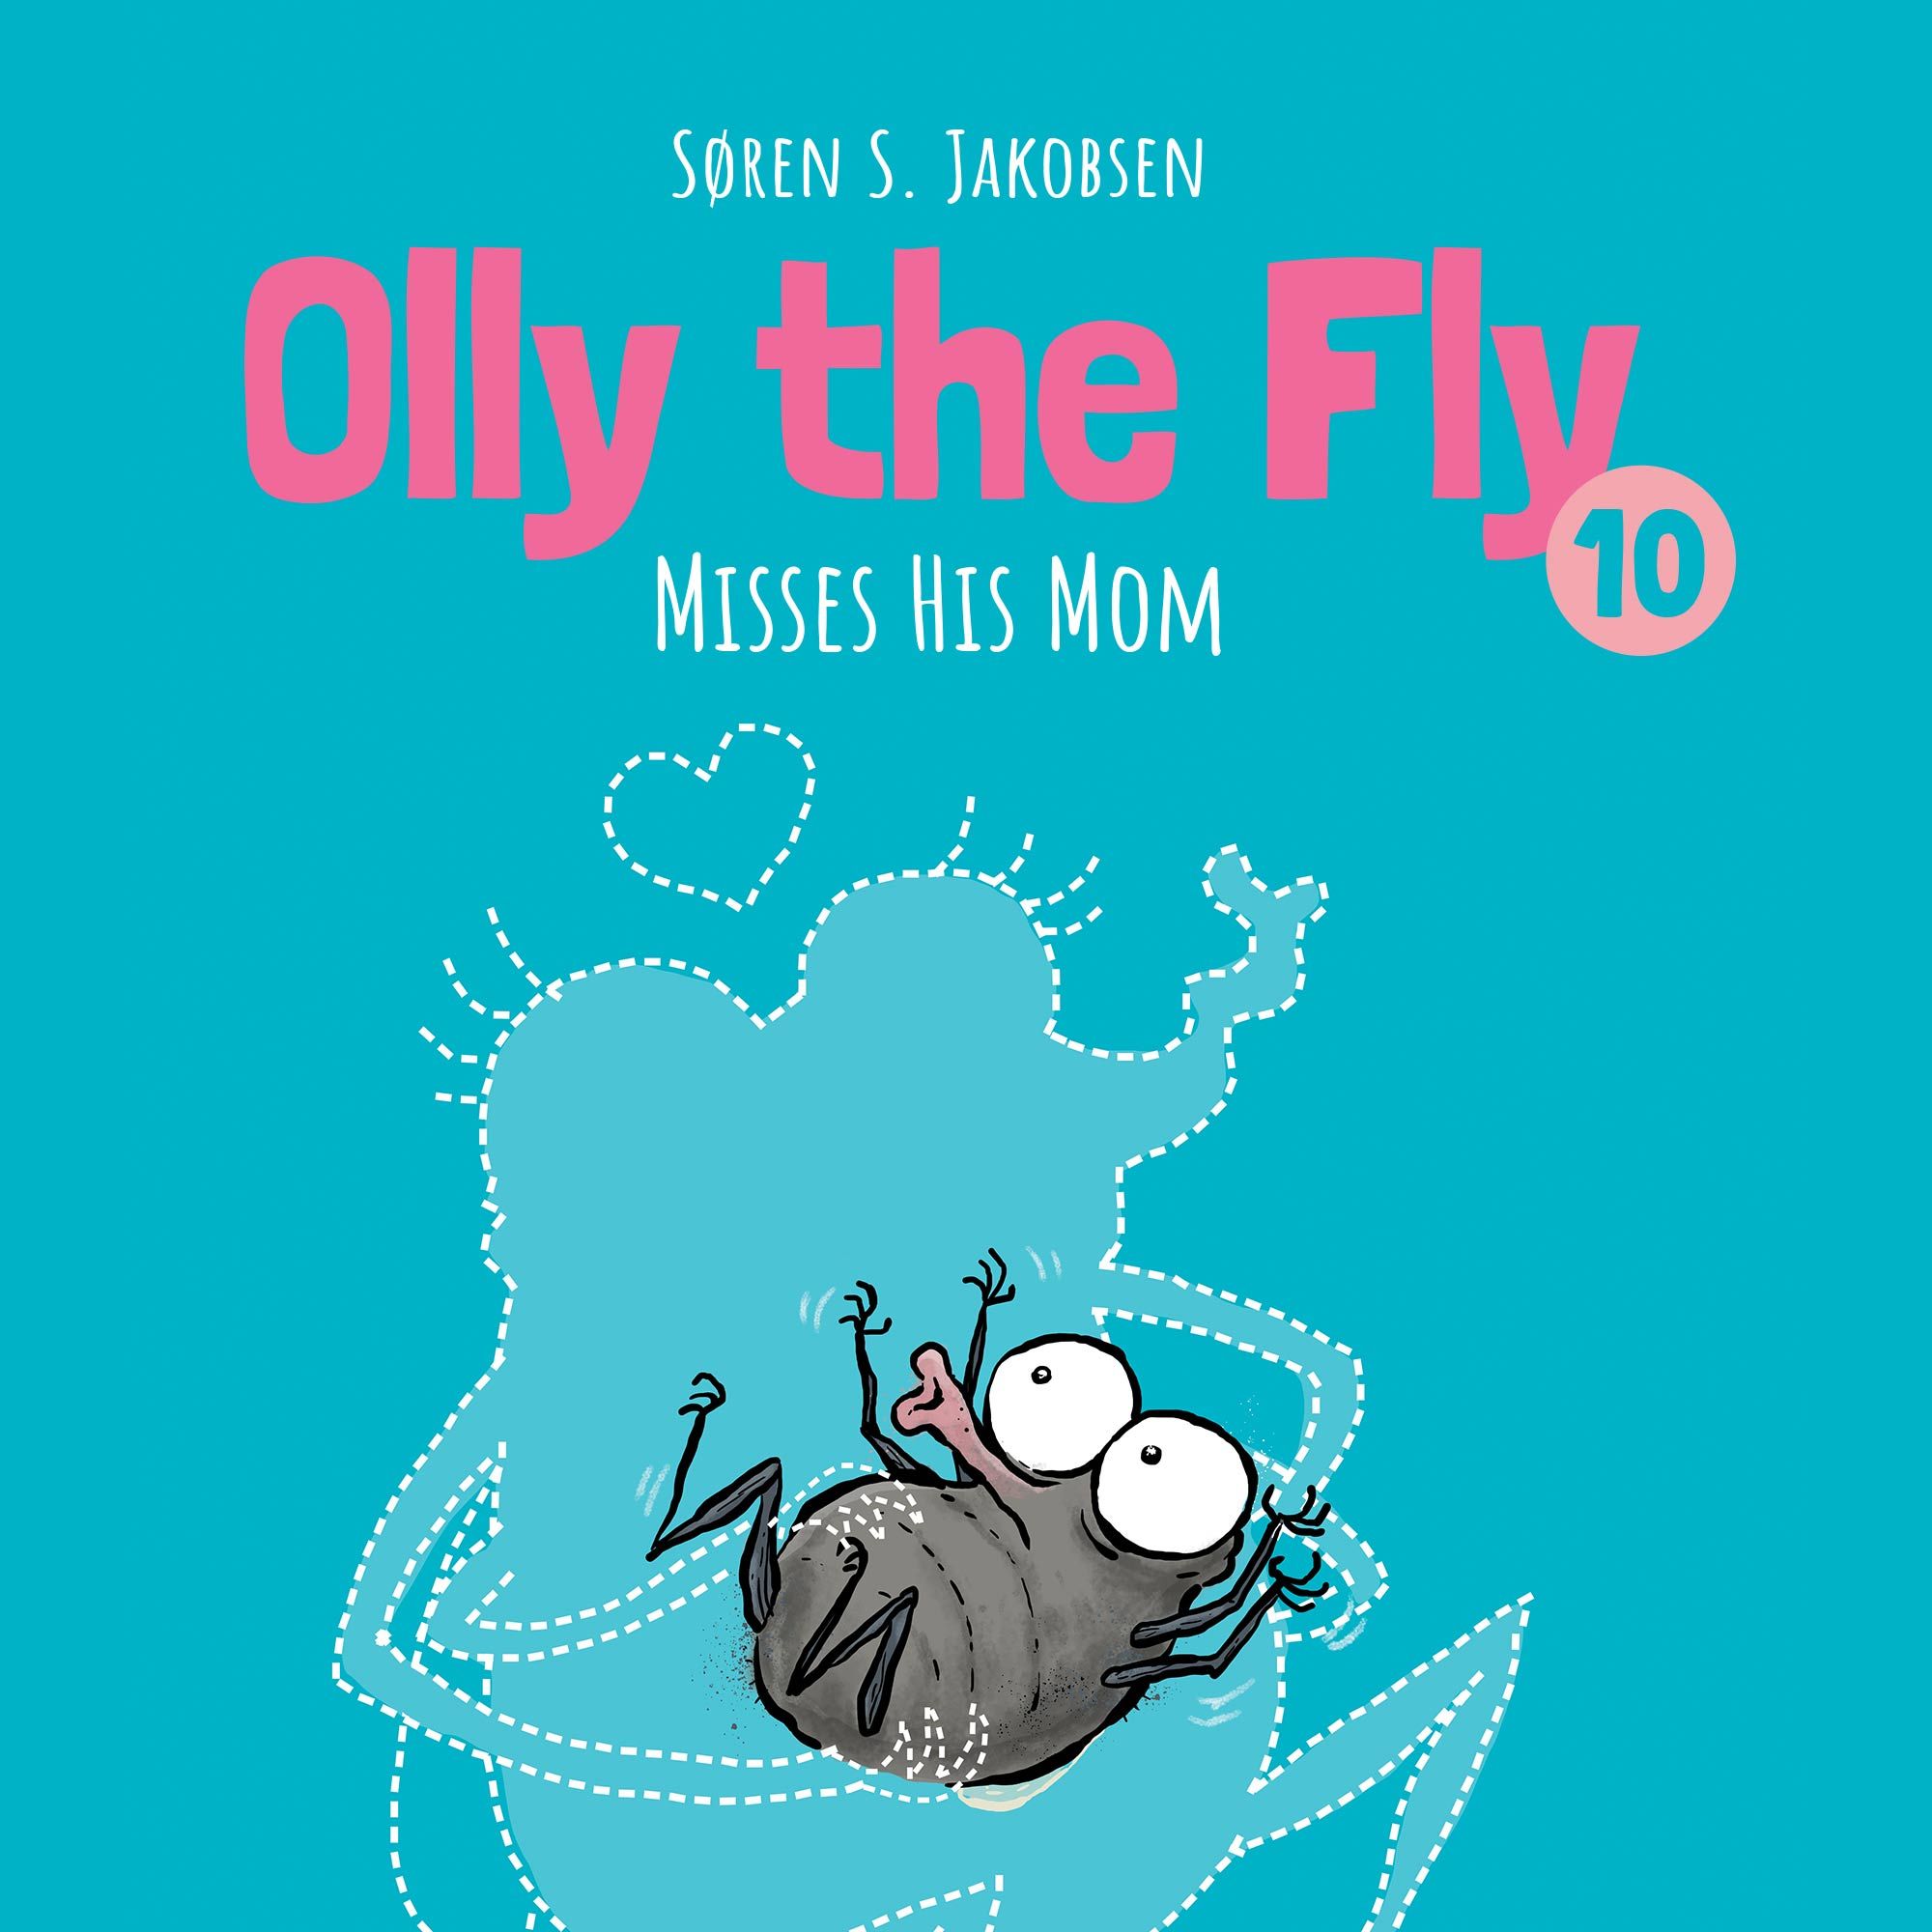 Olly the Fly #10: Olly the Fly Misses His Mom, lydbog af Søren S. Jakobsen